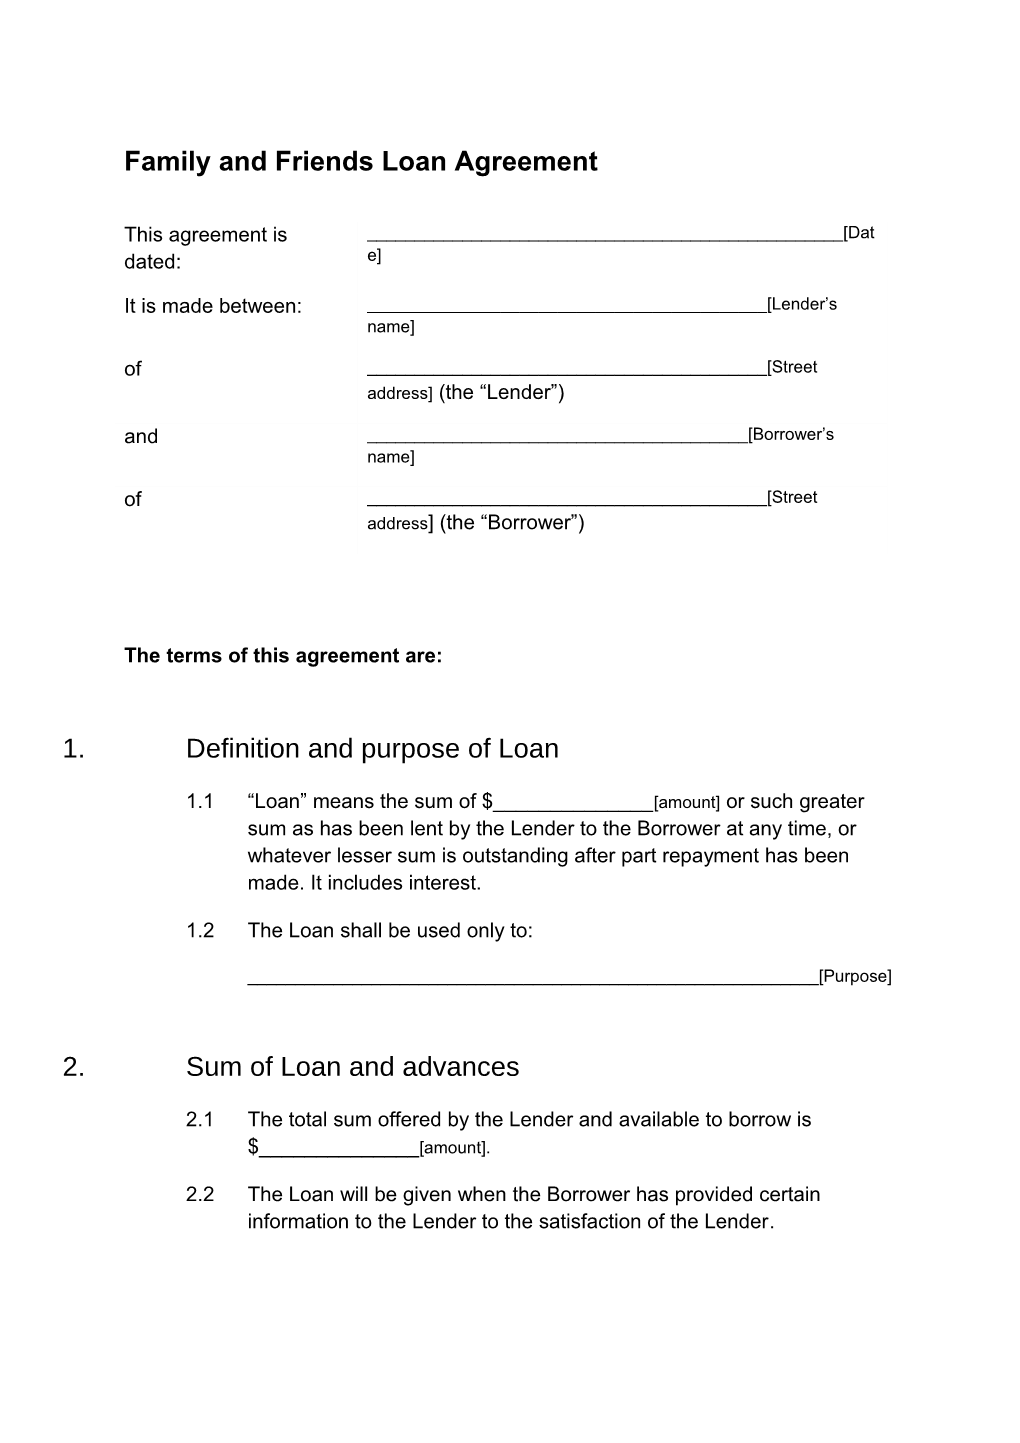 Family and Friends Loan Agreement